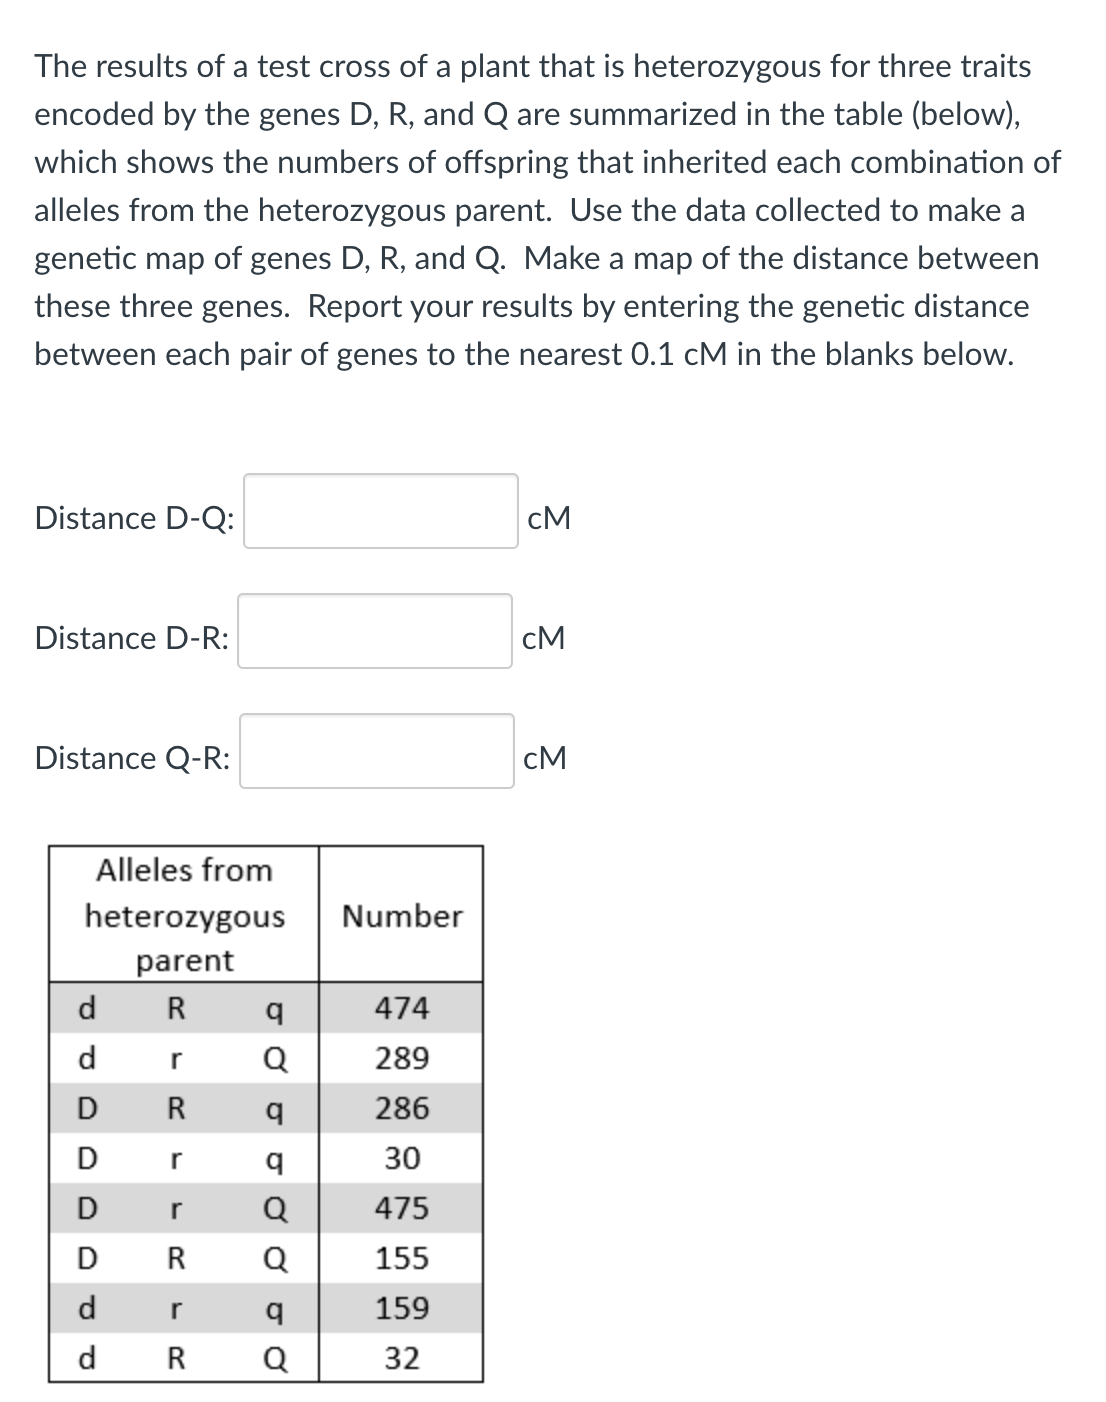 The results of a test cross of a plant that is heterozygous for three traits
encoded by the genes D, R, and Q are summarized in the table (below),
which shows the numbers of offspring that inherited each combination of
alleles from the heterozygous parent. Use the data collected to make a
genetic map of genes D, R, and Q. Make a map of the distance between
these three genes. Report your results by entering the genetic distance
between each pair of genes to the nearest 0.1 cM in the blanks below.
Distance D-Q:
Distance D-R:
Distance Q-R:
Alleles from
heterozygous
parent
R
d
d
D
D
D
D
d
r
R
r
r
R
r
R
Number
q
474
Q
289
q
286
q
30
Q 475
Q
155
159
32
q
Q
cM
см
cM